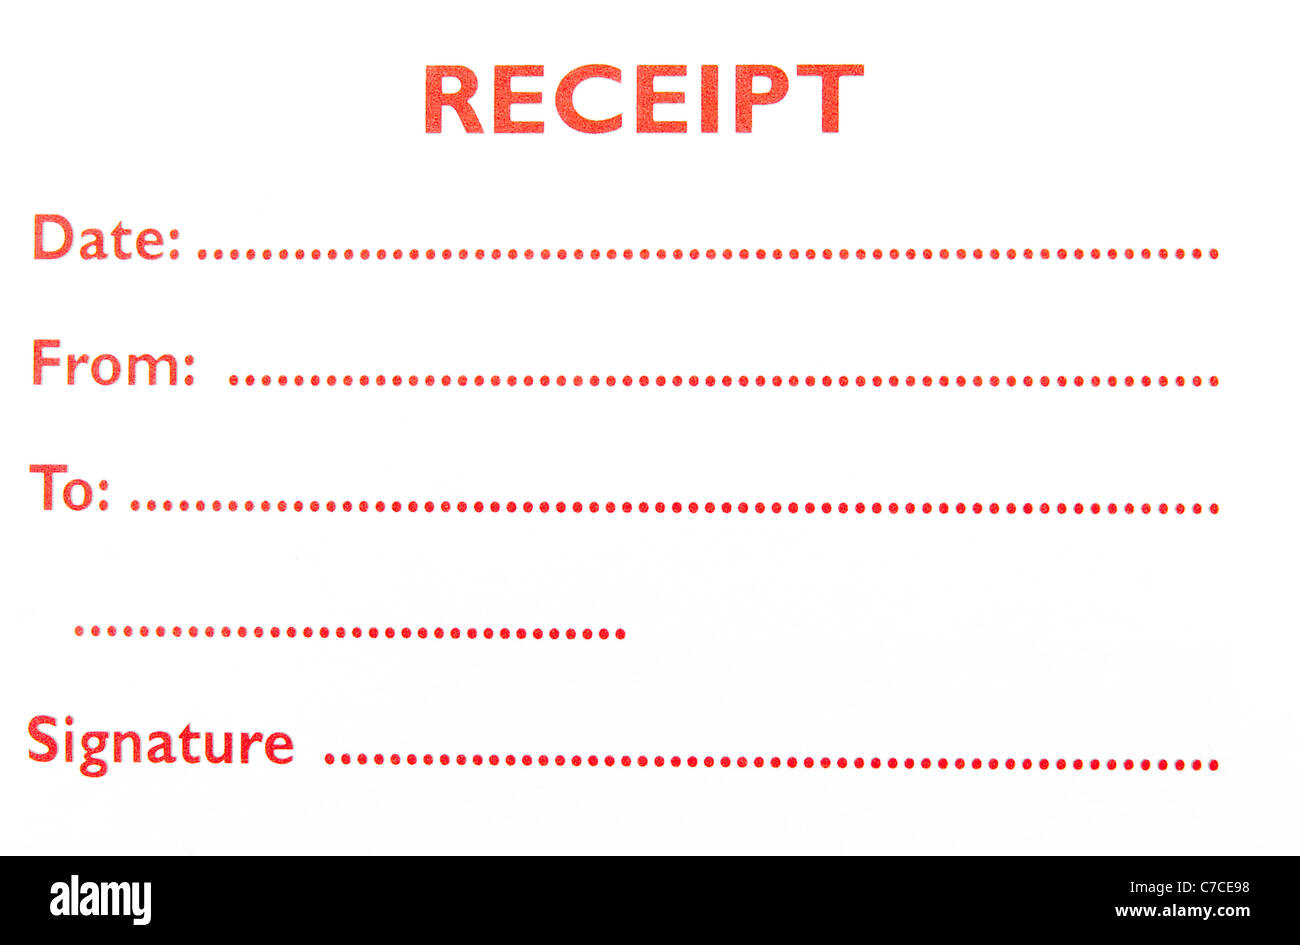 Receipt Ticket Red Lettering on White Background Stock Photo